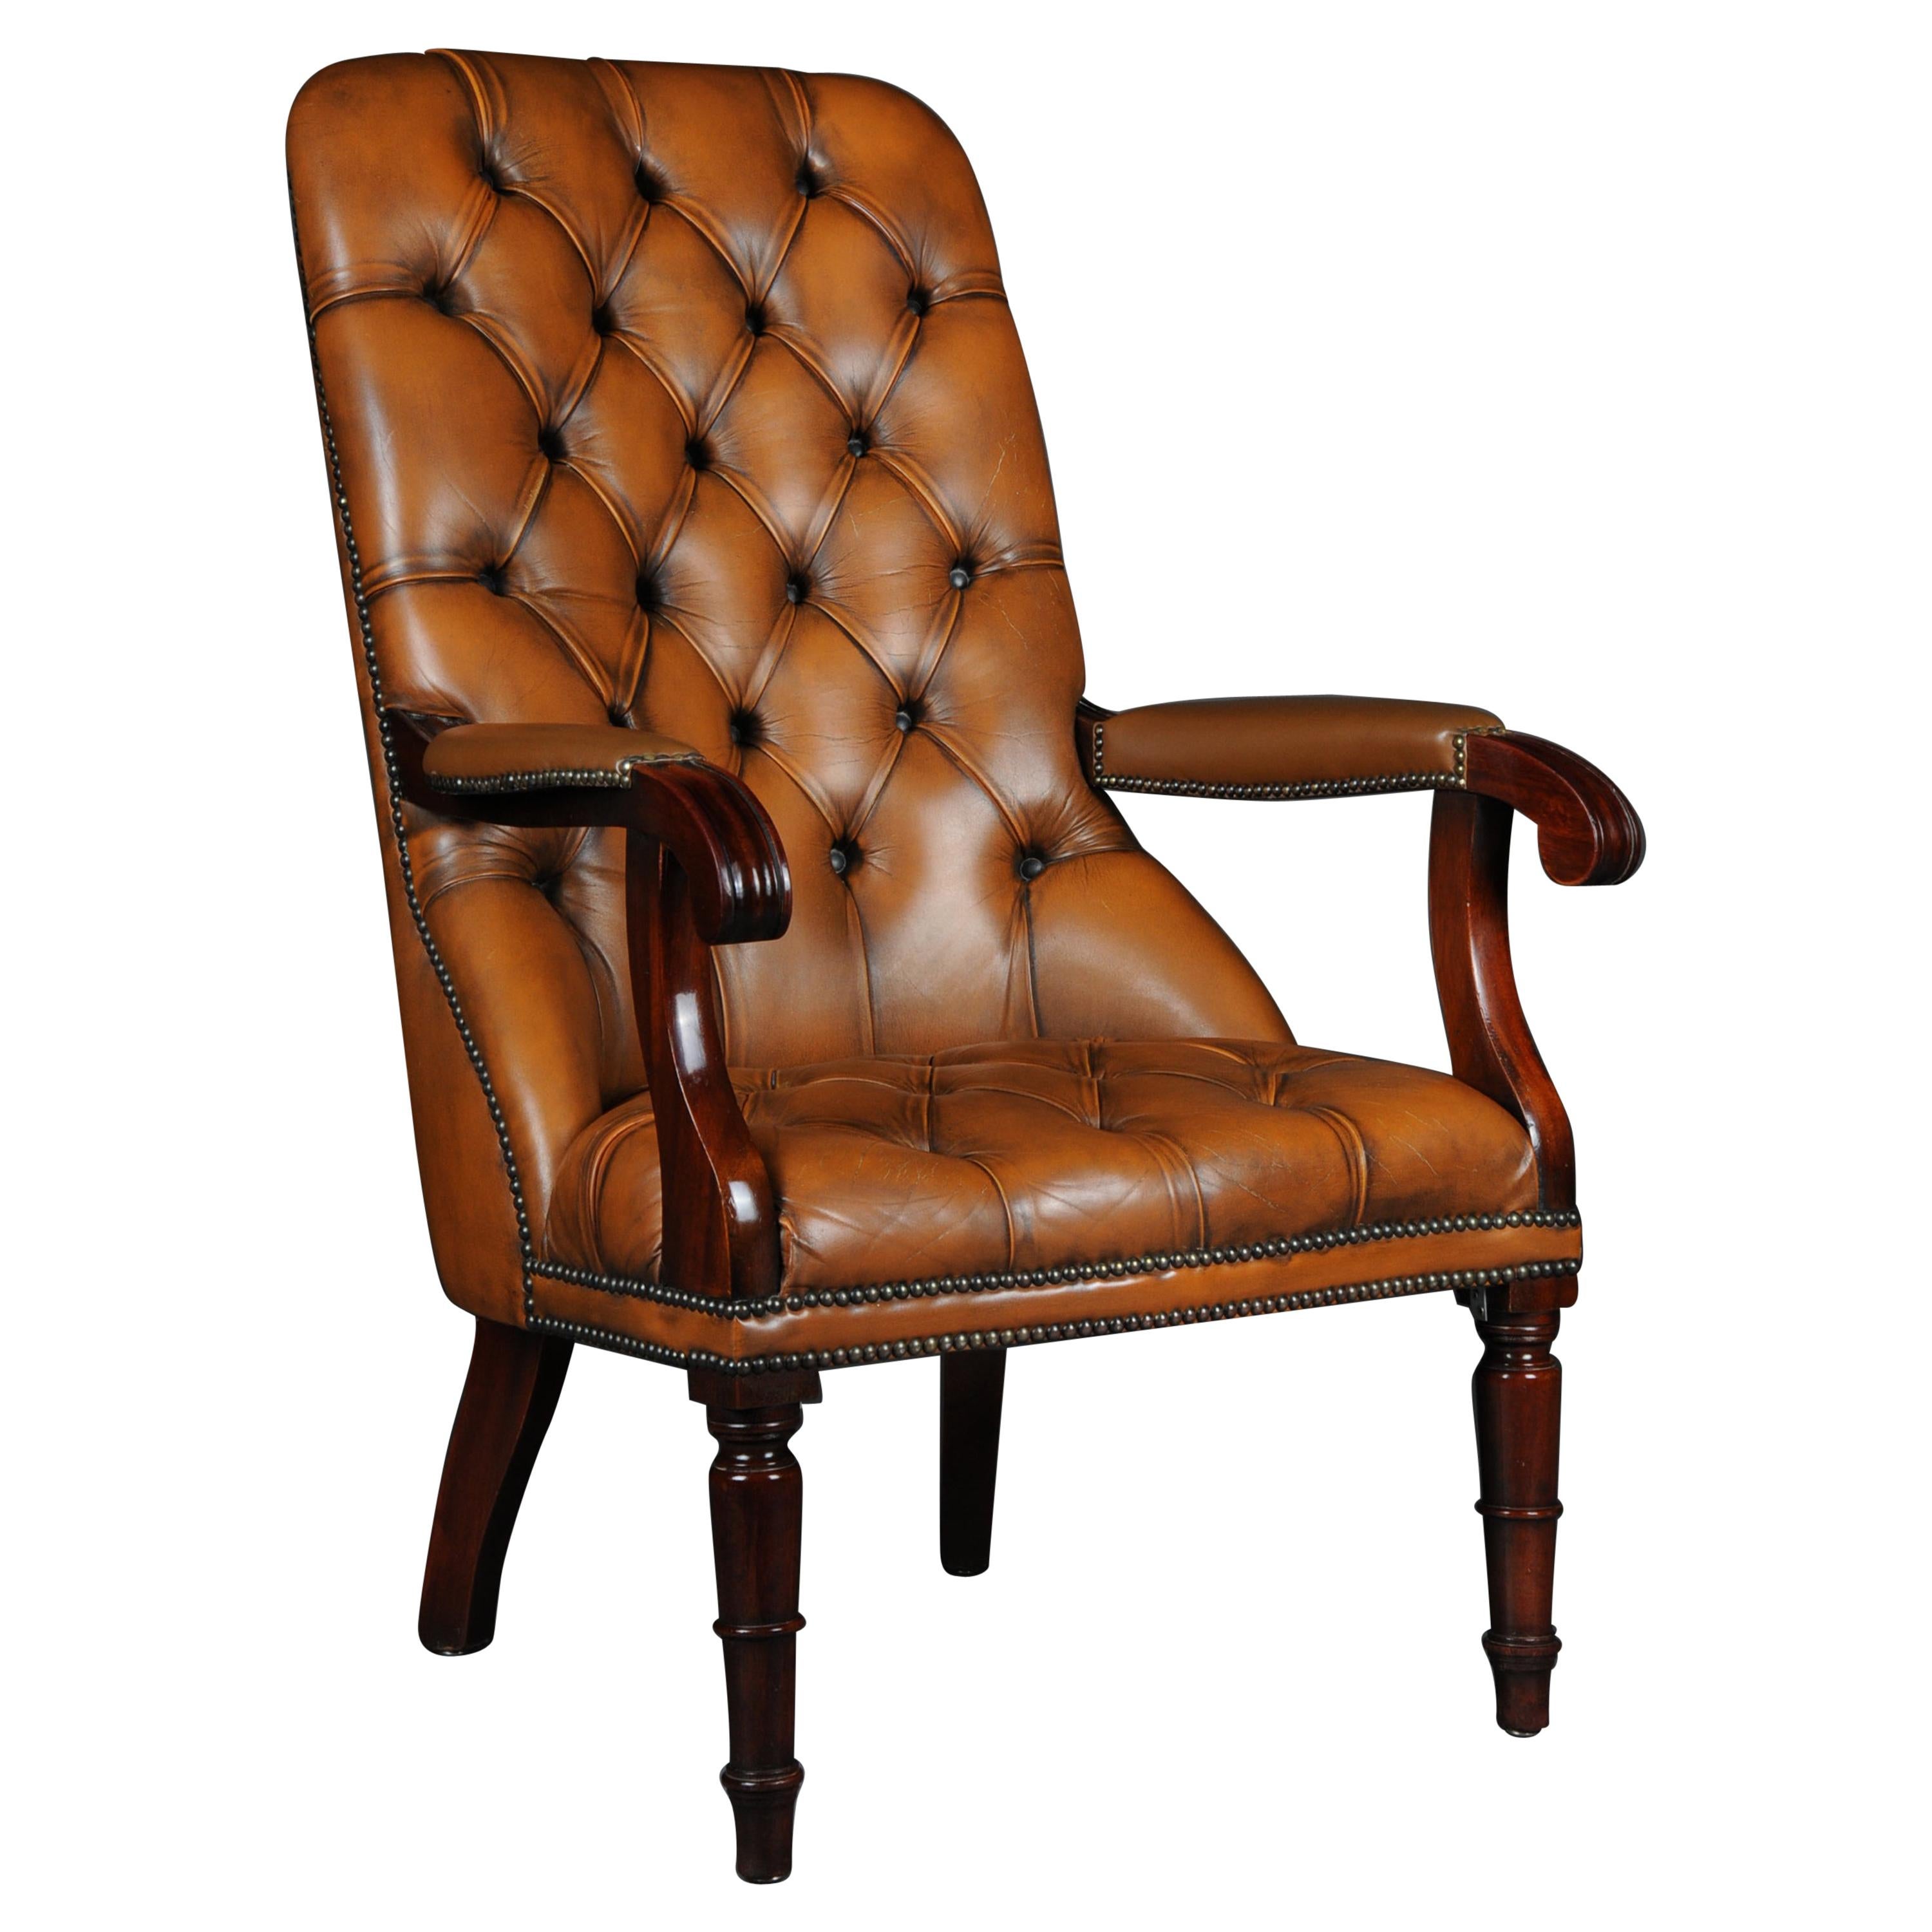 Classic English Chesterfield Armchair, Leather Cognac